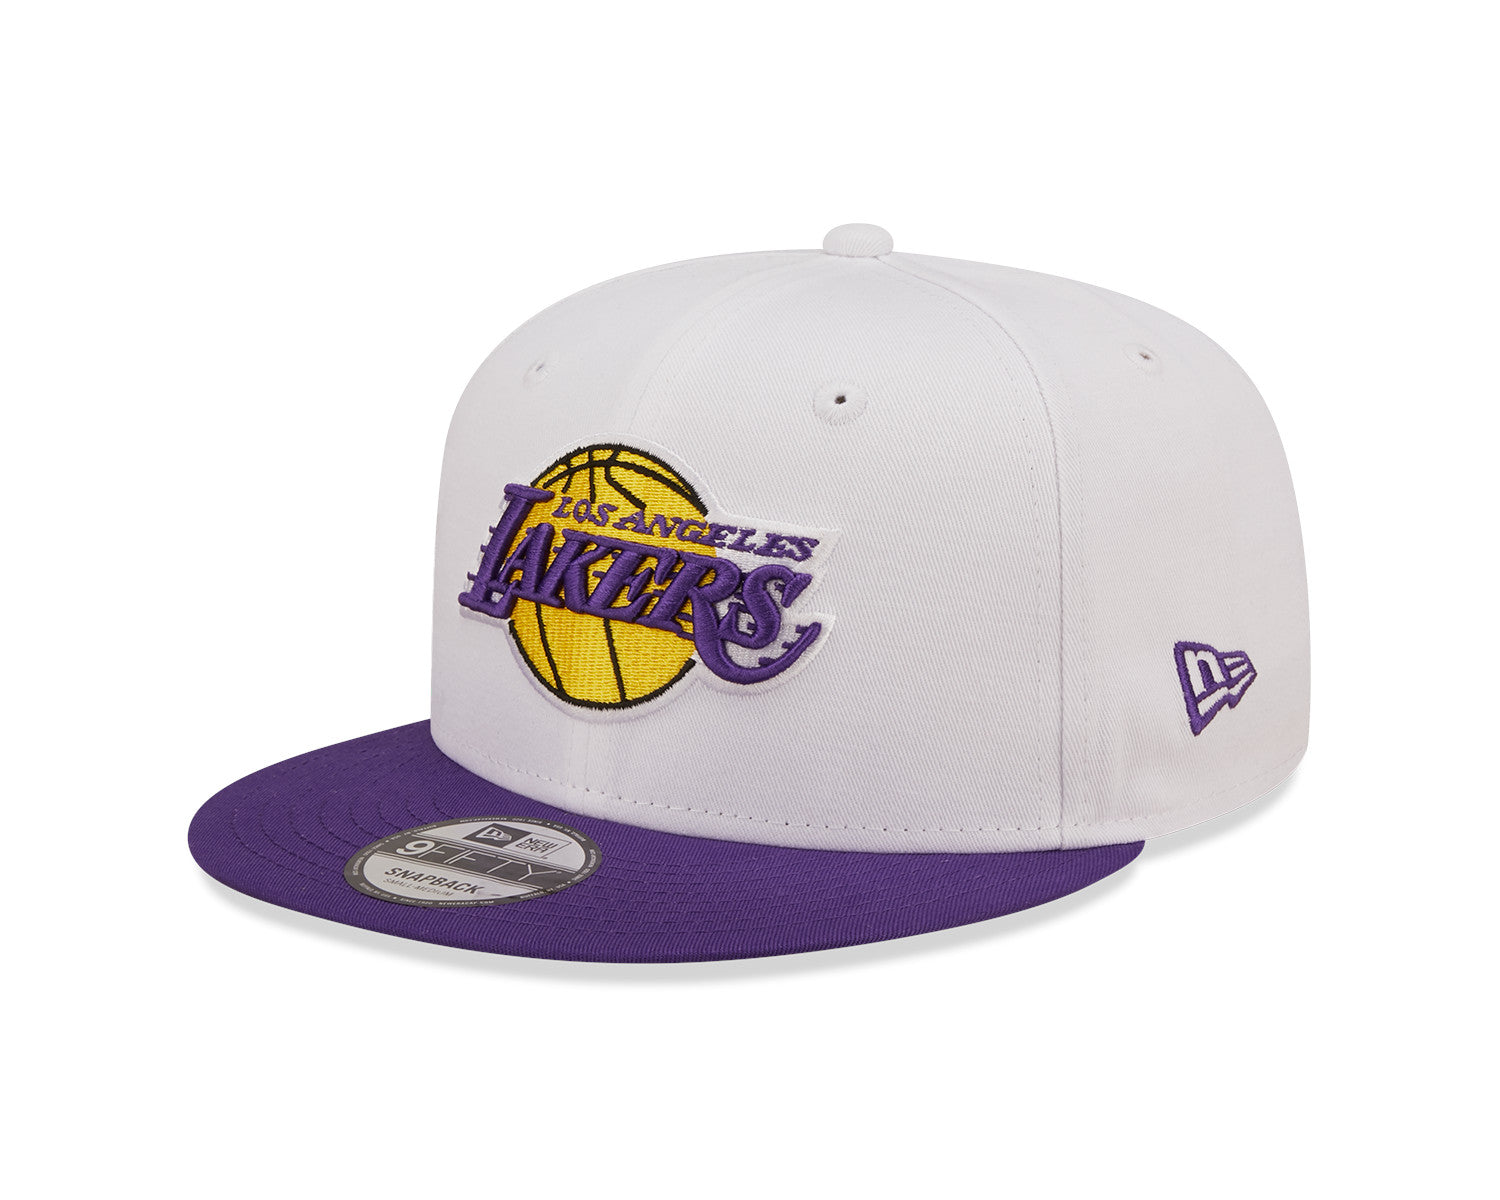 Los Angeles Lakers 9FIFTY White Crown Team White/Purple Cap